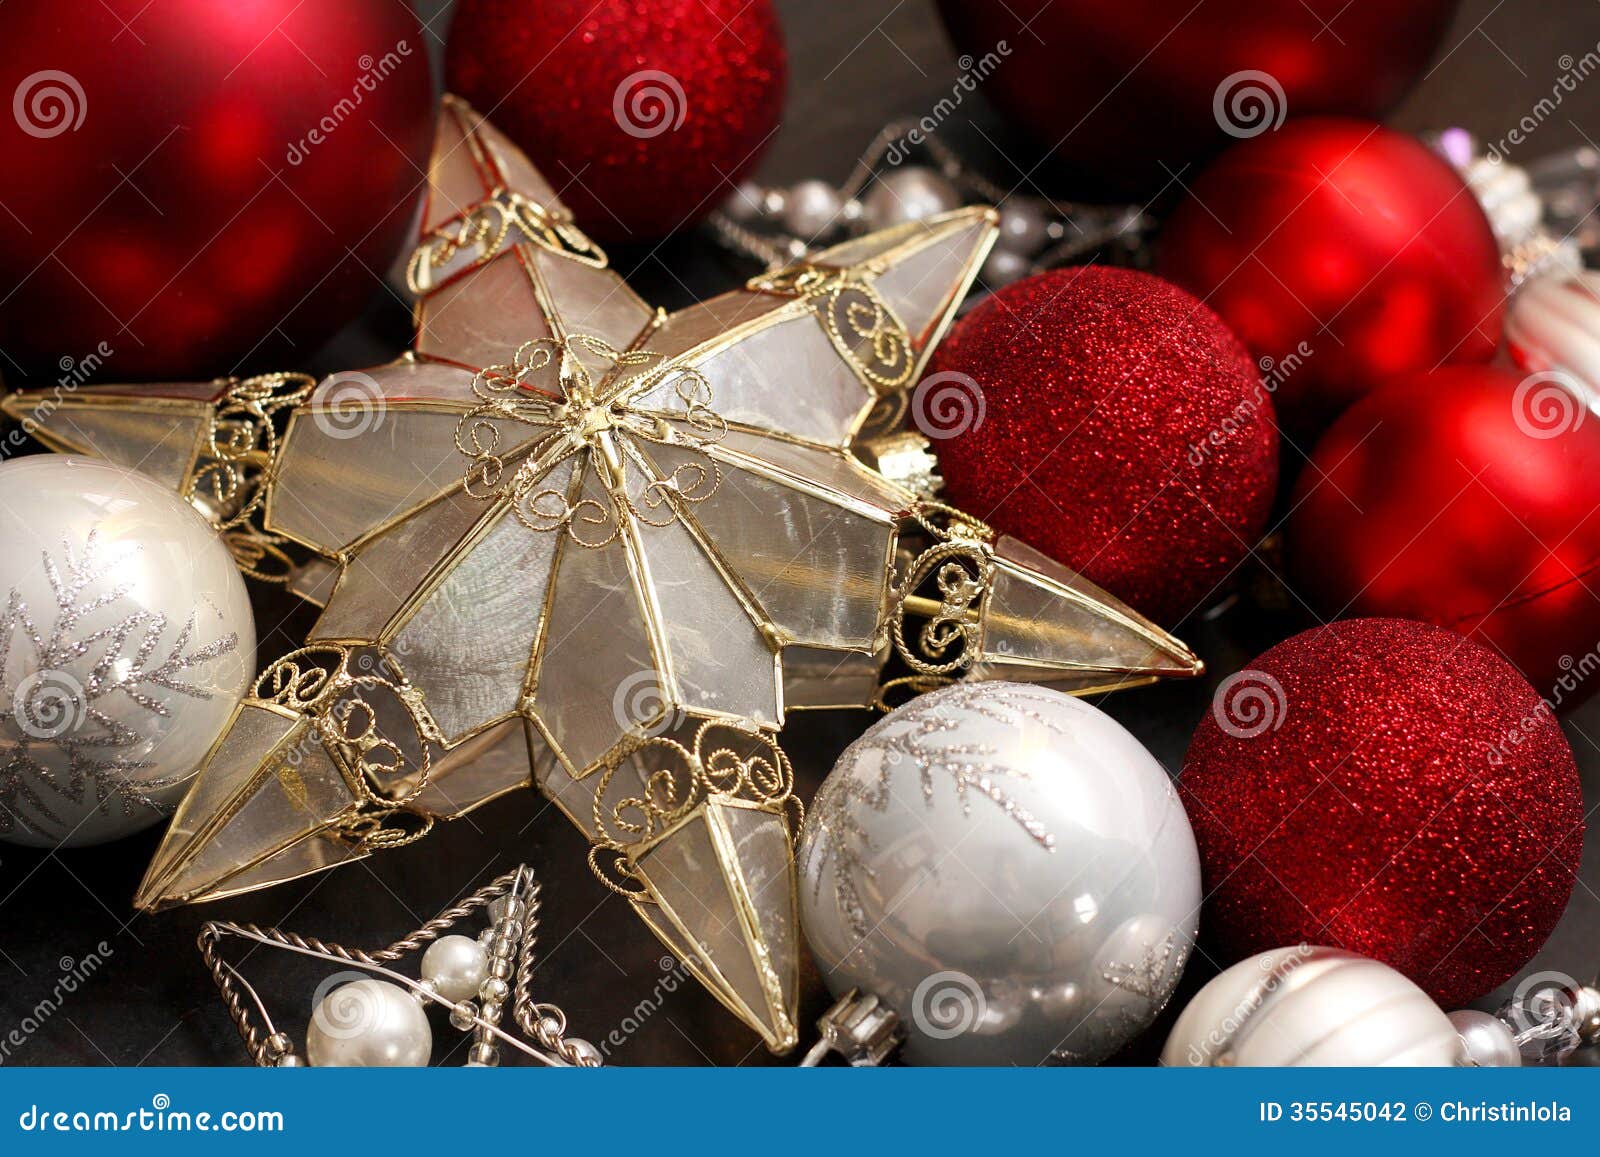 Gold Christmas Tree Star And Red Bulbs Stock Photography - Image: 35545042